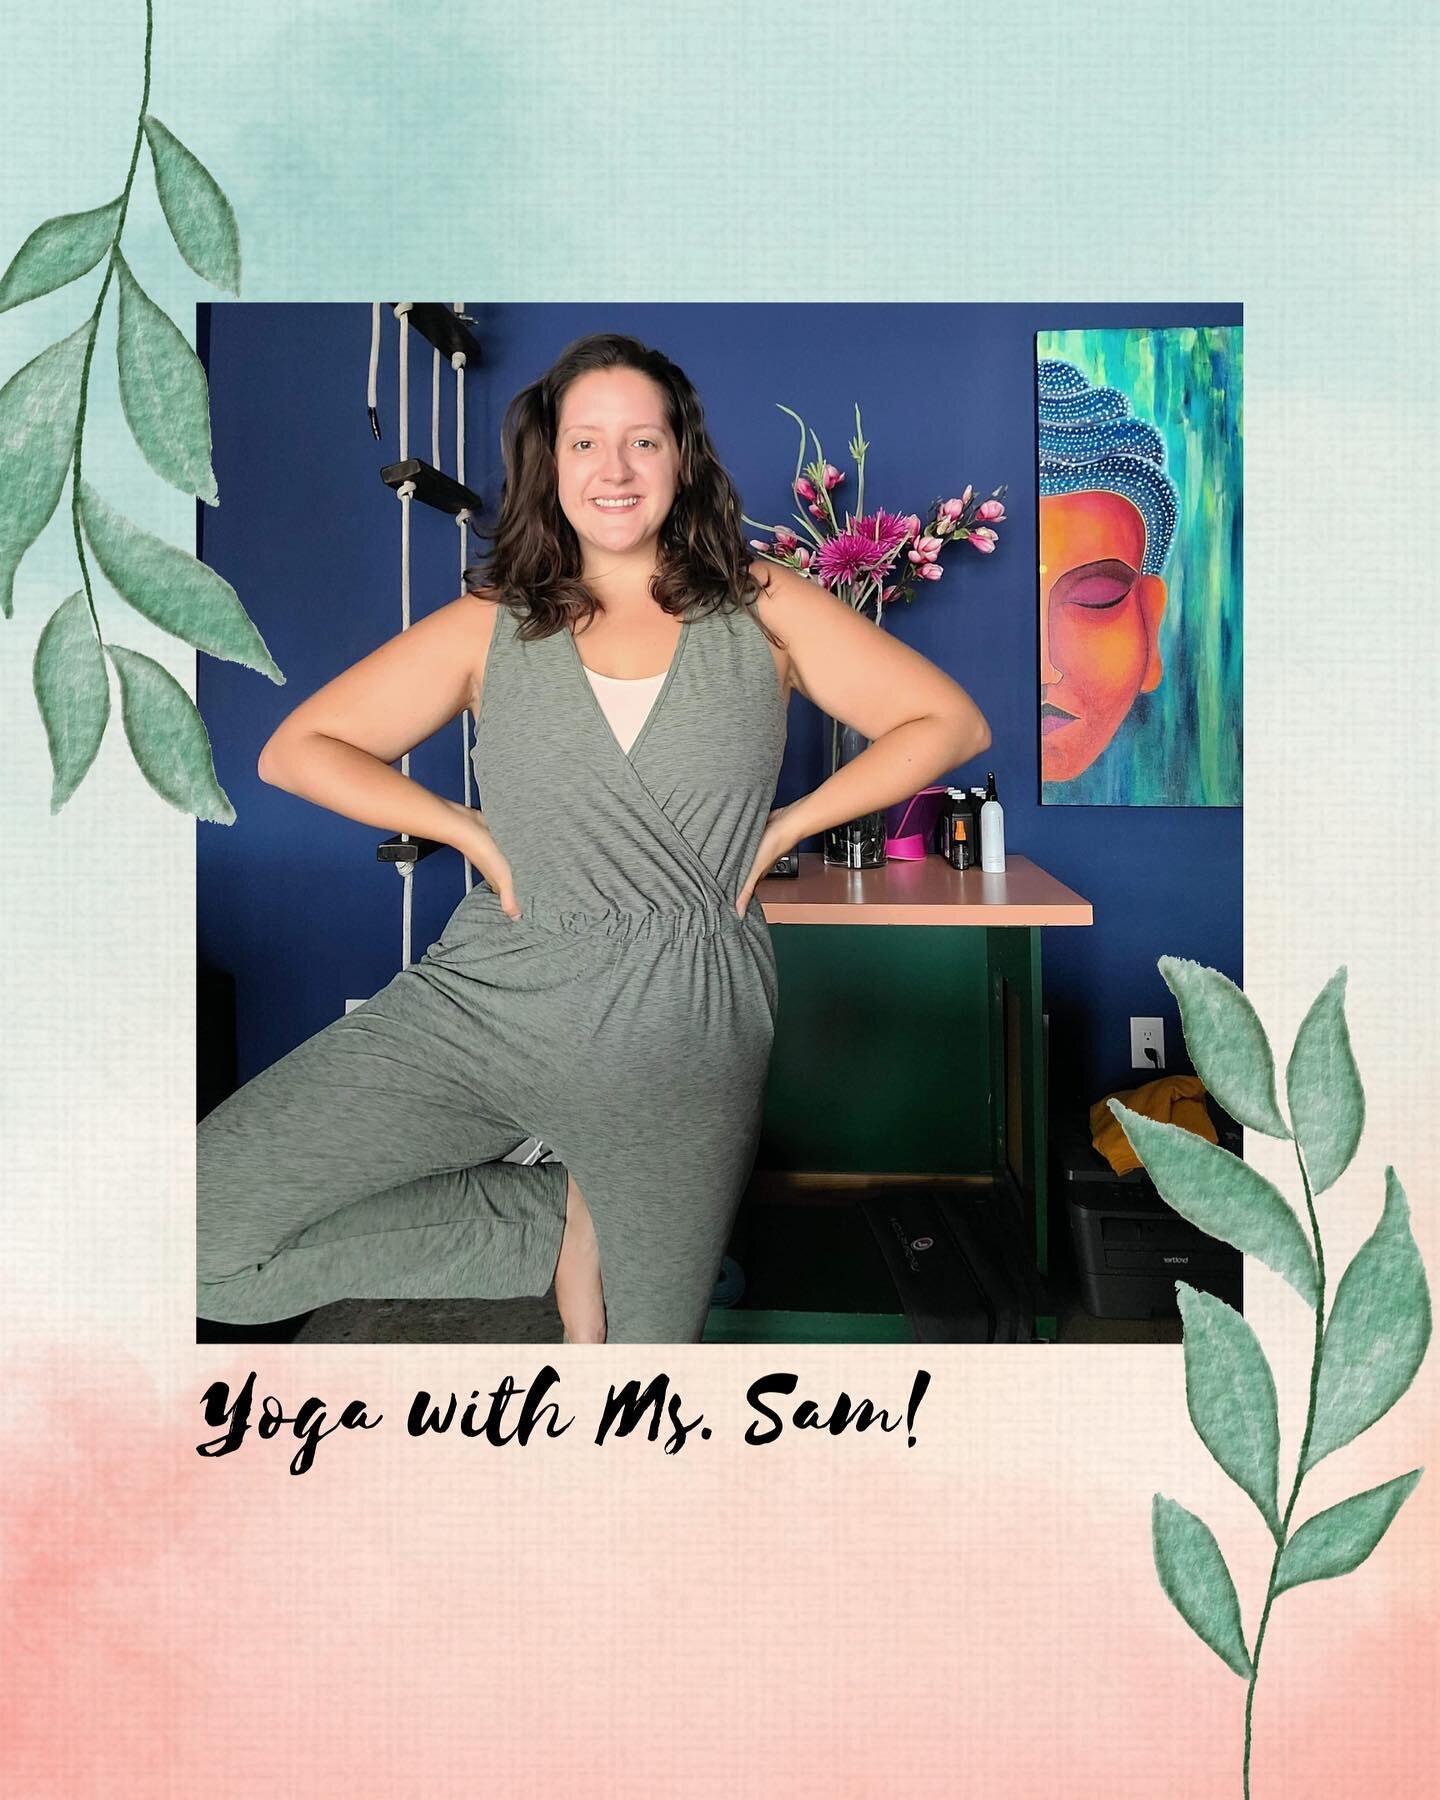 We&rsquo;re so excited to announce that Starting July 26th, Ms. Sam will be coming to Sunflower to do yoga with the kids! 🌻